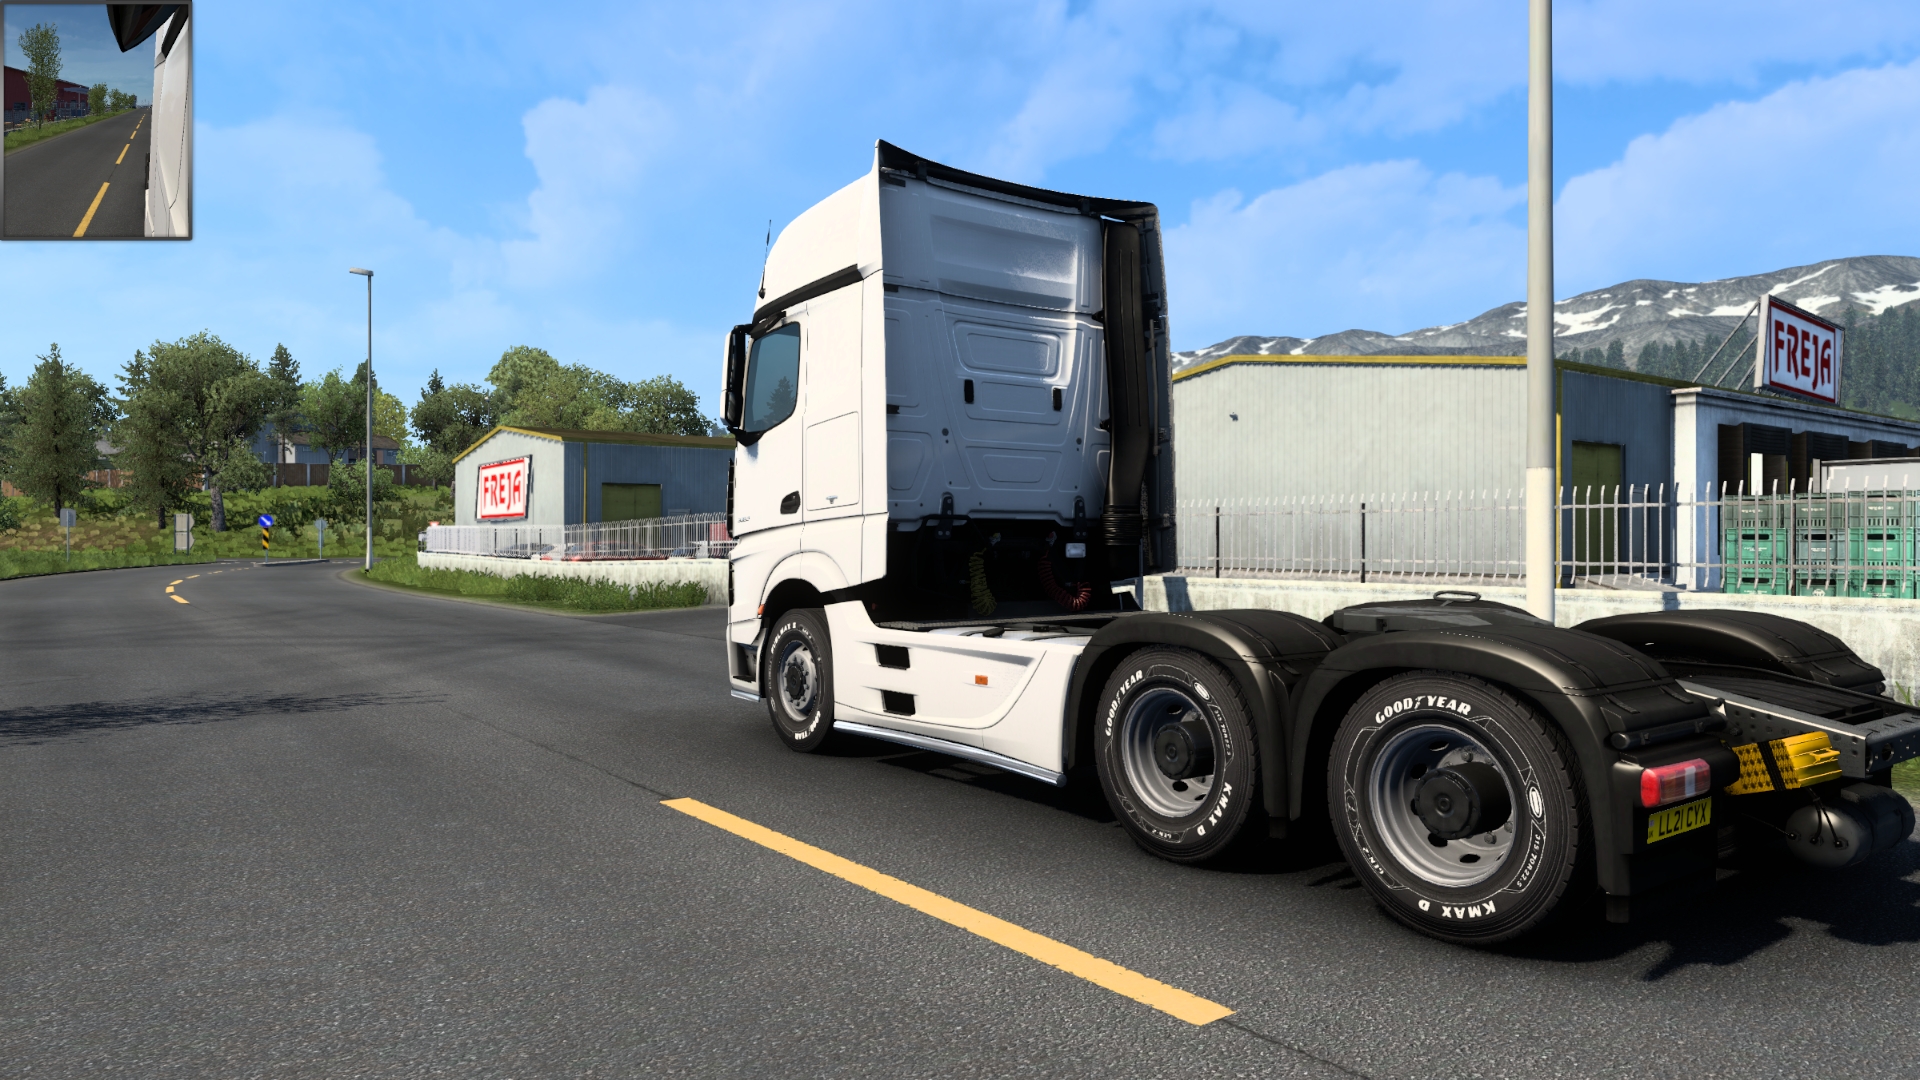 Image 005 - How to Cancel the Current Job on Euro Truck Simulator 2 13